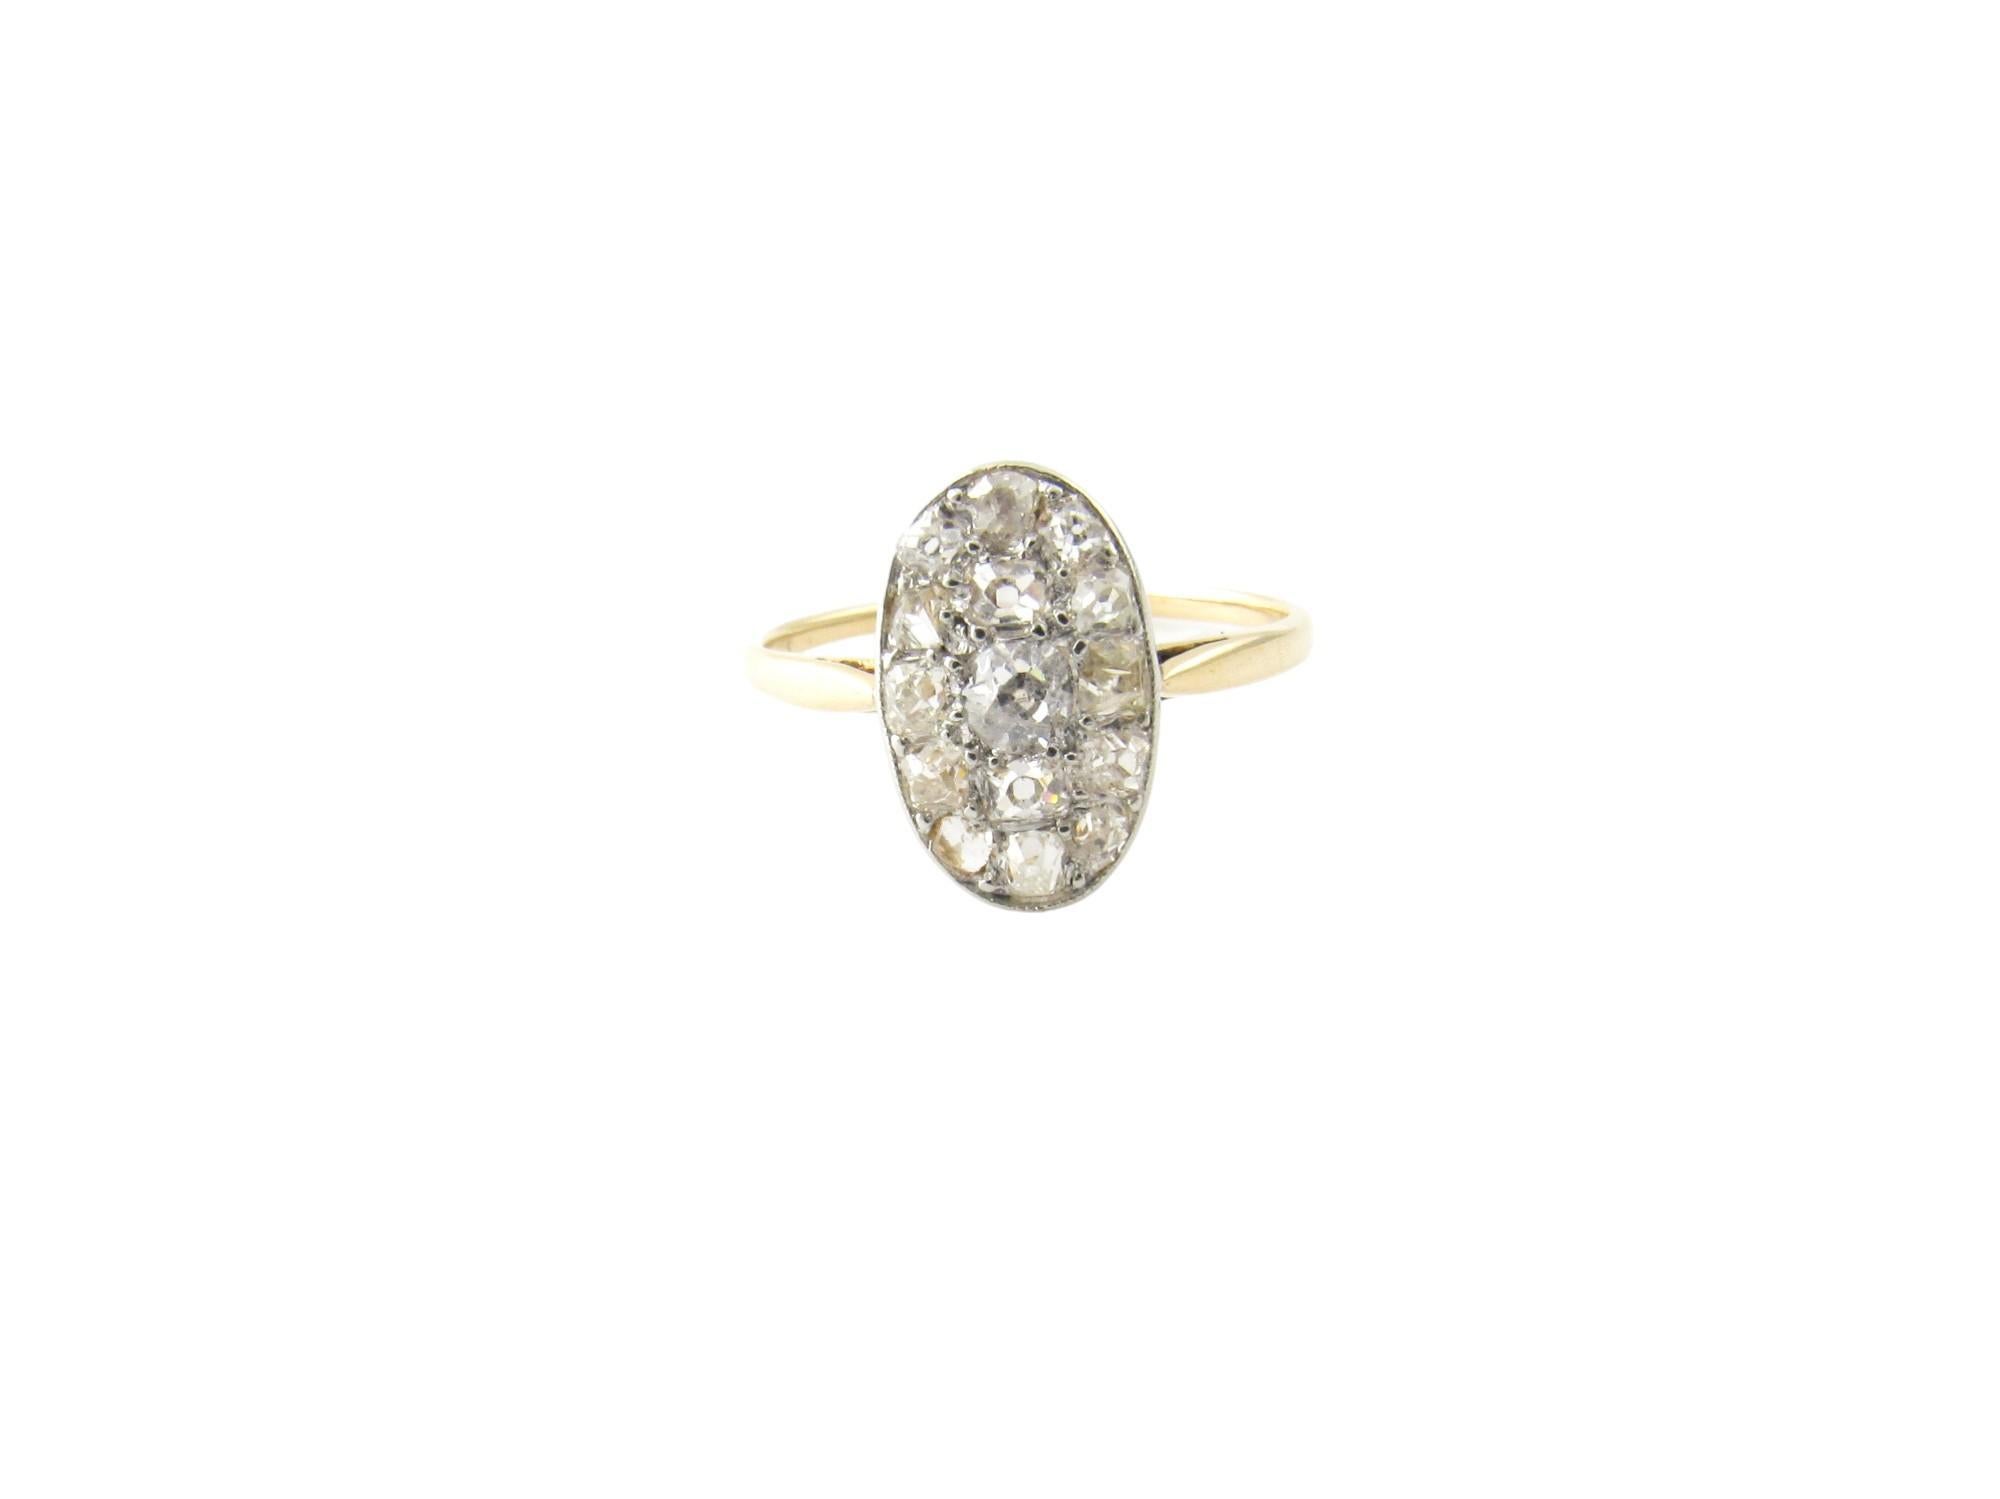 Antique 14 Karat Yellow and White Gold Oval Diamond Ring Size 6.25

This sparkling ring features 16 old mine cut diamonds* set in classic 14K yellow gold. Top of ring measures

13 mm x 8 mm. Shank measures 1 mm.

*Chips noted in two